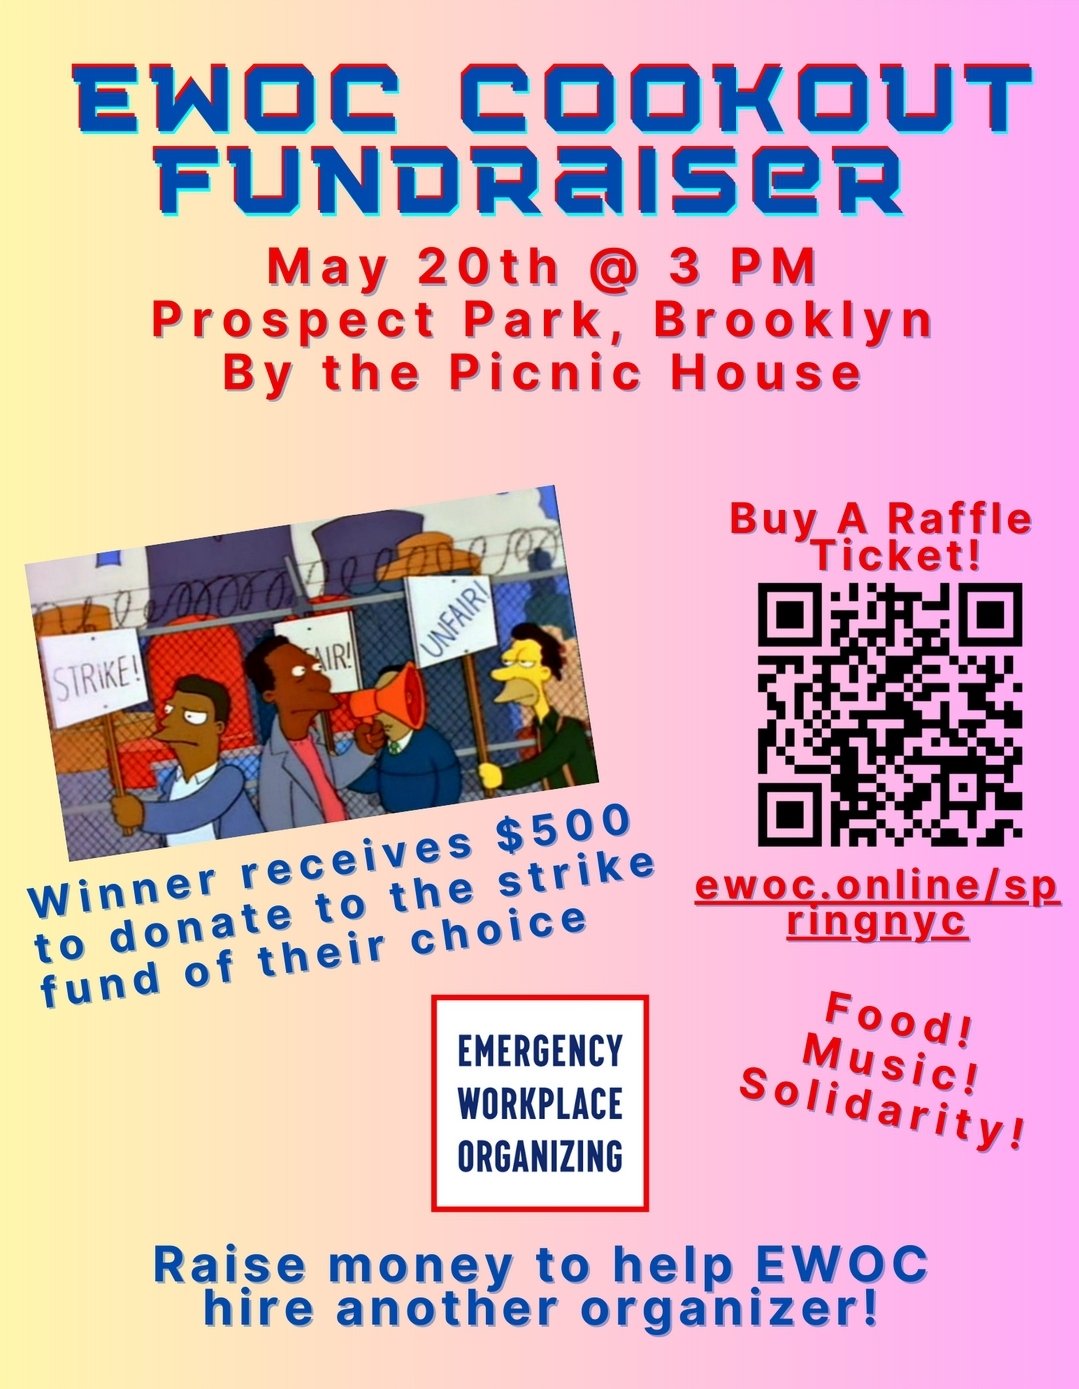 EWOC Cookout FundraiserMay 20th @ 3 PMProspect Park, BrooklynBy the Public HouseBuy A Raffle Ticket!https://ewoc.online/springnycWinner receives $500 to donate to the strike fund of their choiceFood! Music! Solidarity!Raise money to help EWOC hire another organizer!